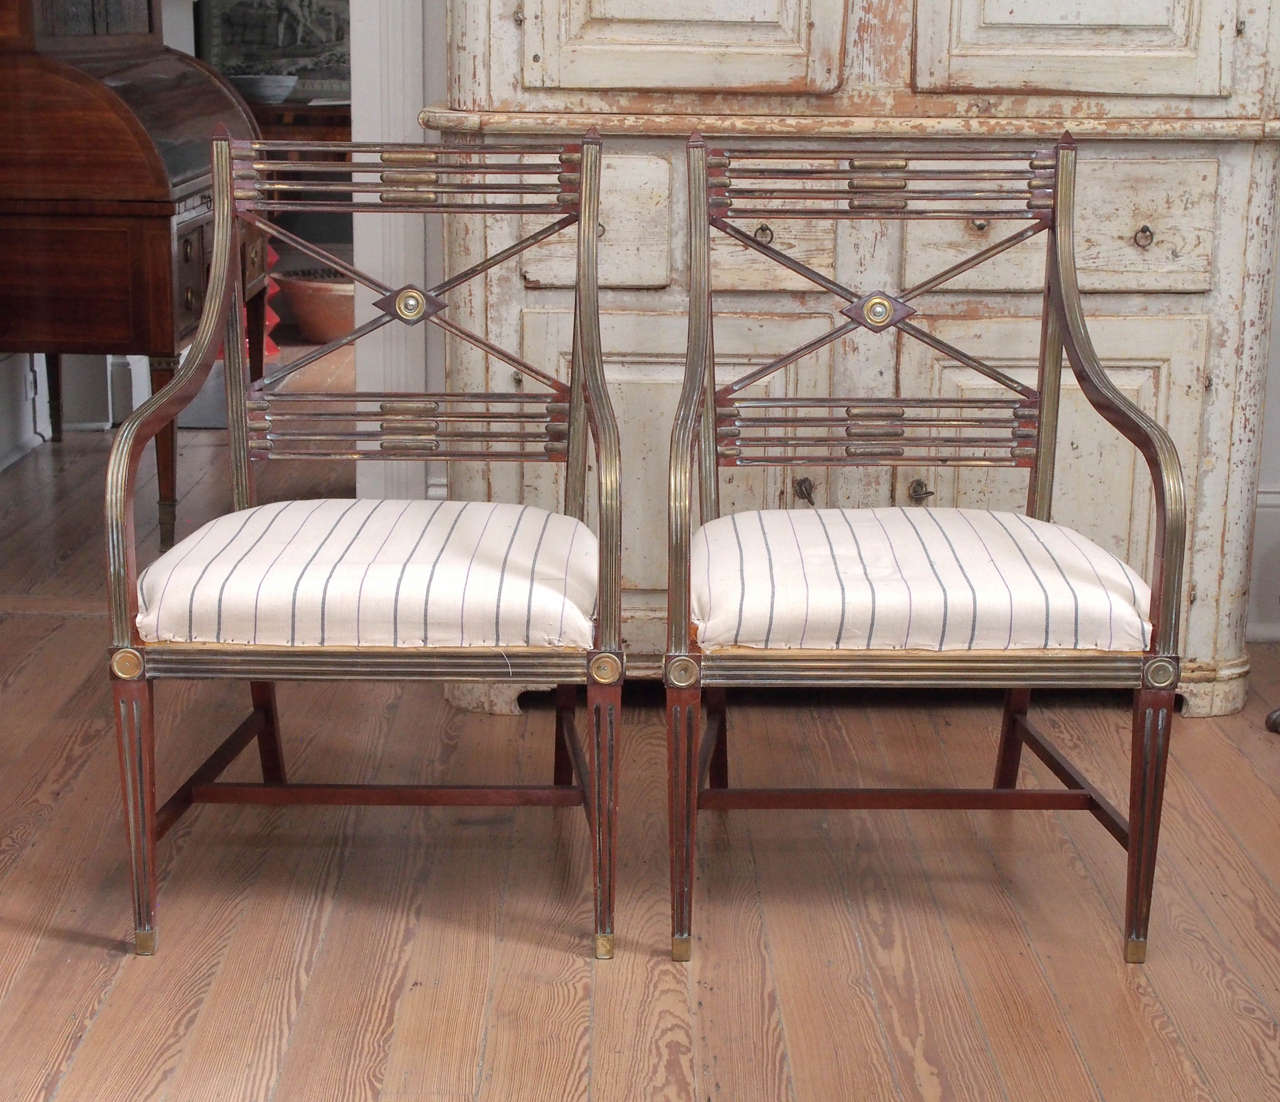 Pair of Russian mahogany armchairs with brass decorative elements.